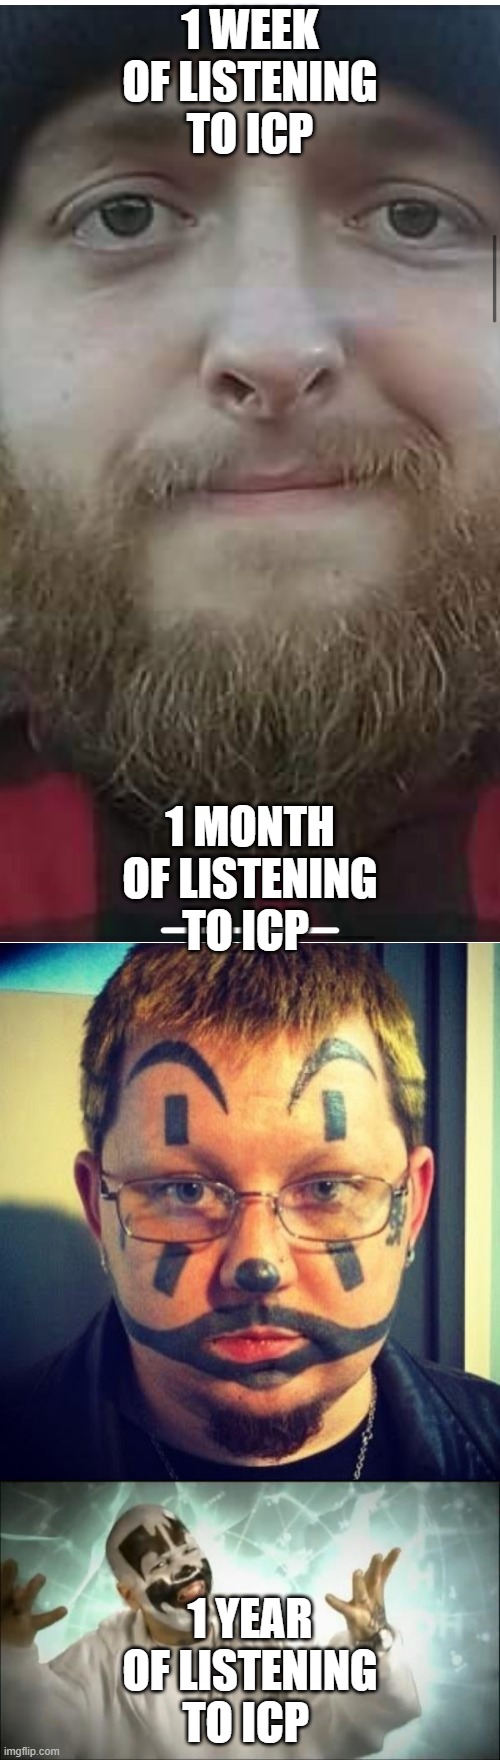 1 WEEK OF LISTENING TO ICP; 1 MONTH OF LISTENING TO ICP; 1 YEAR OF LISTENING TO ICP | image tagged in insane clown posse,icp face tattoo | made w/ Imgflip meme maker